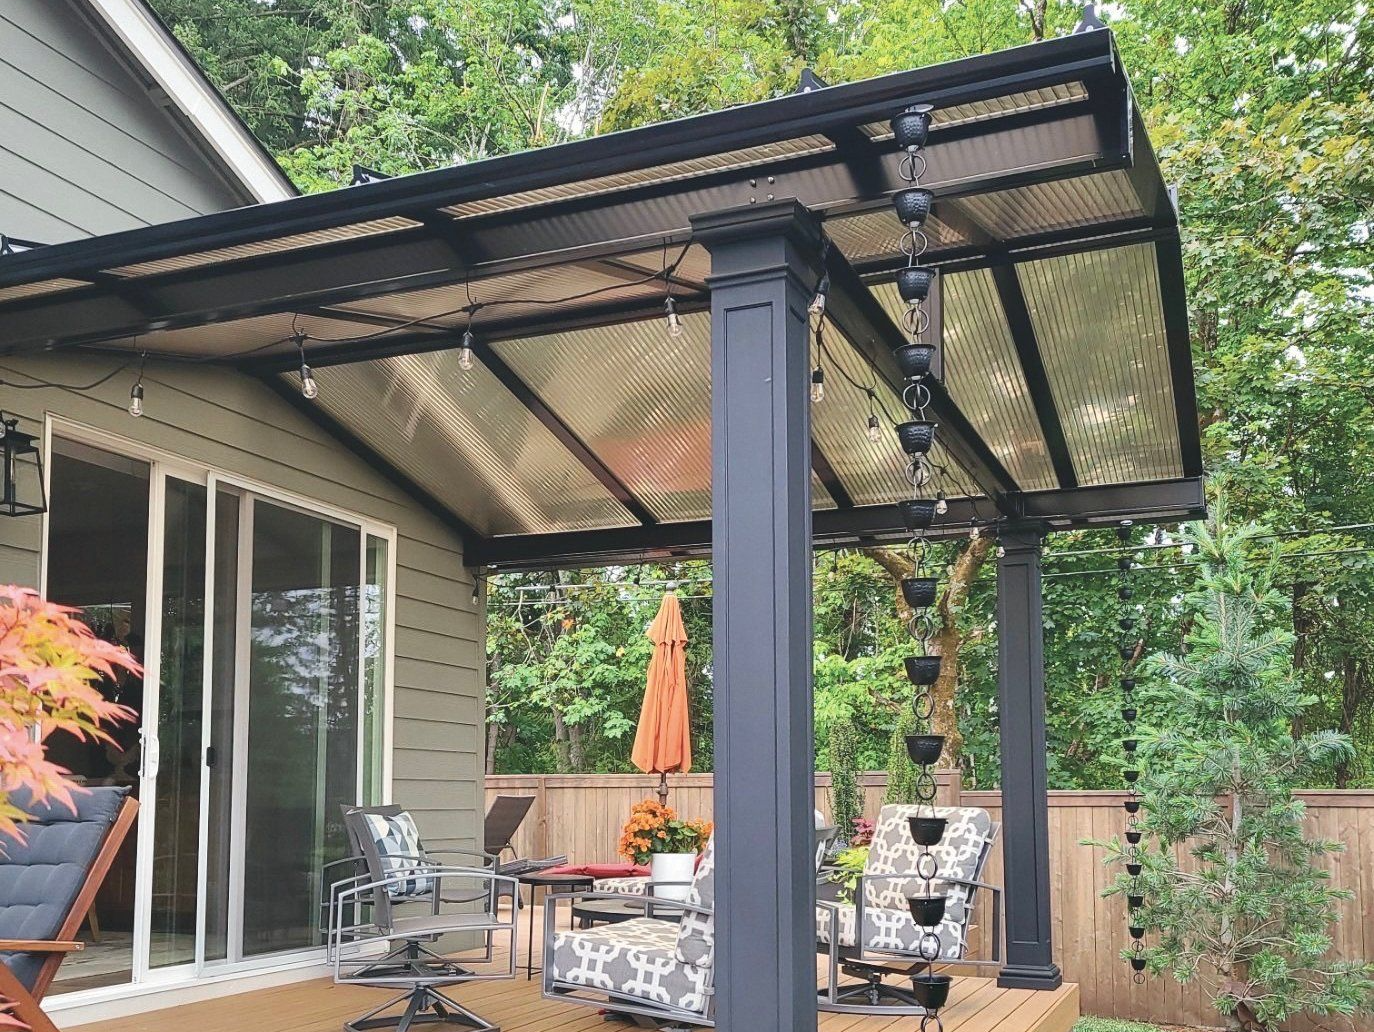 Patio Covers in Sylvan Oregon - Gable Roof with ACRYLITE Acrylic